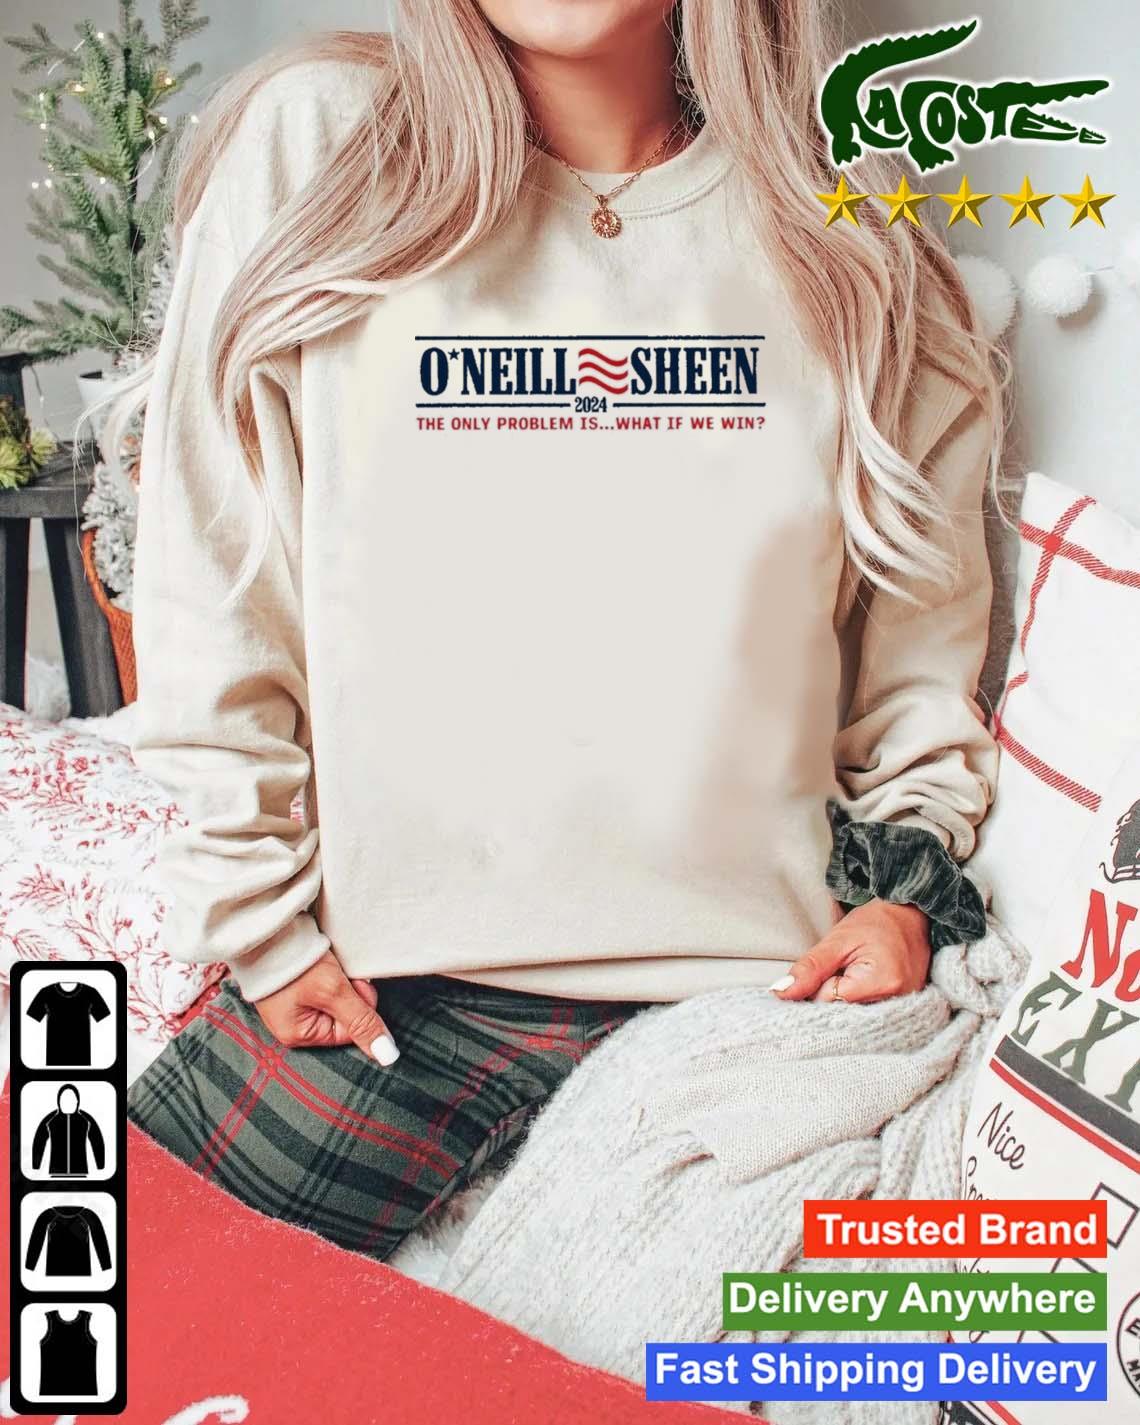 O Neill Sheen The Only Problem Is What If We Win 2024 Sweats Mockup Sweater